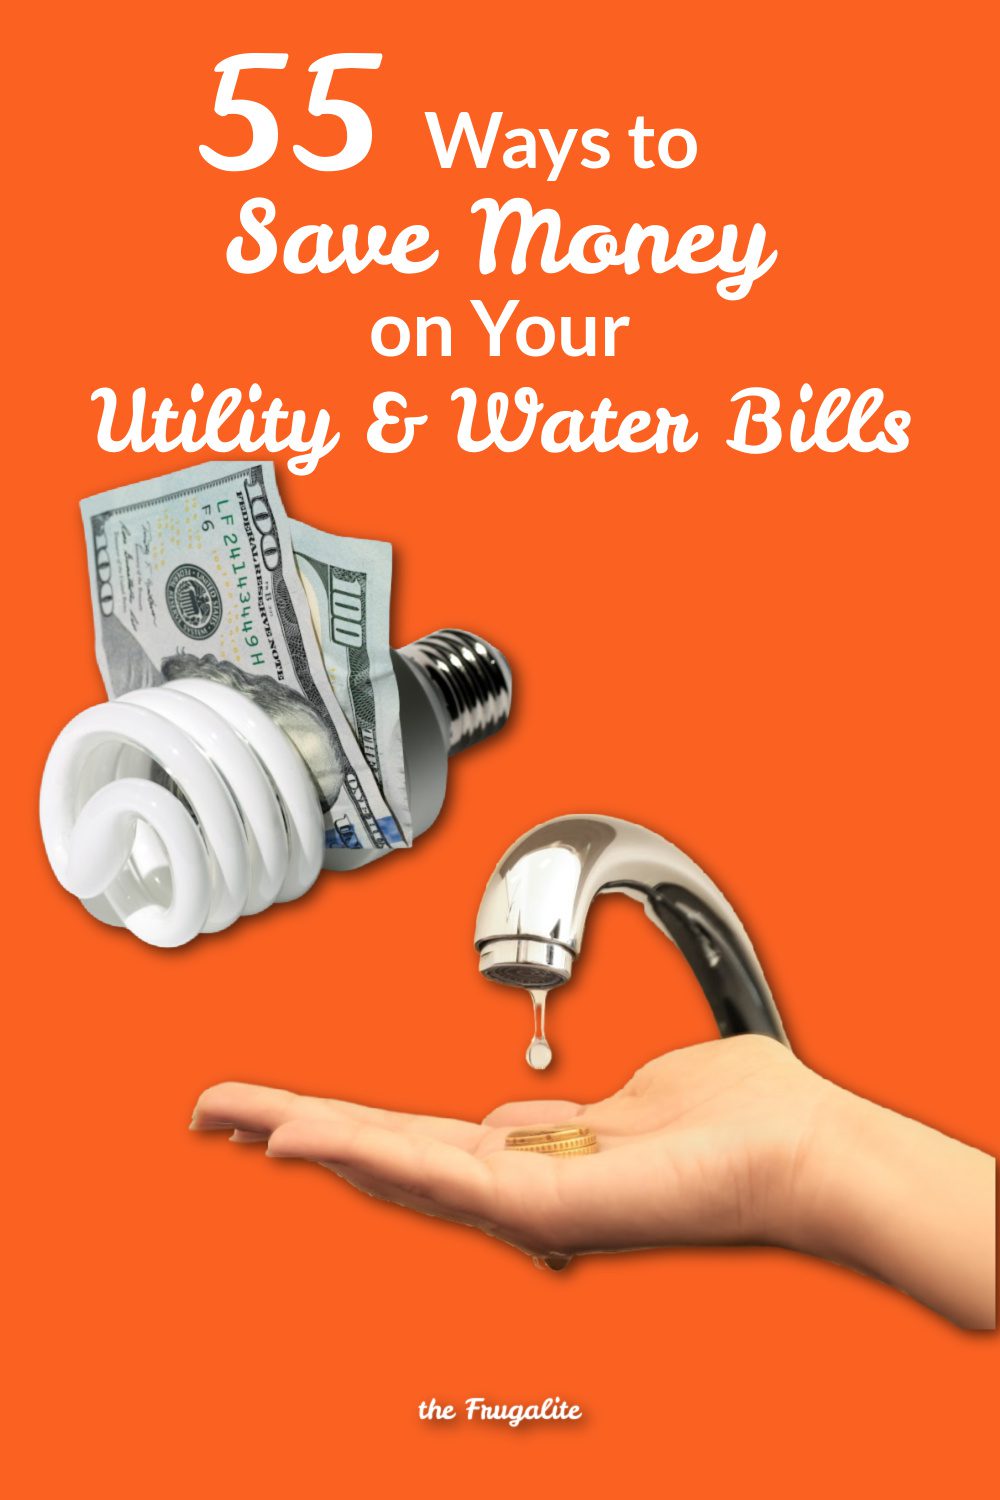 55 Ways To Save Money on Your Utility and Water Bills